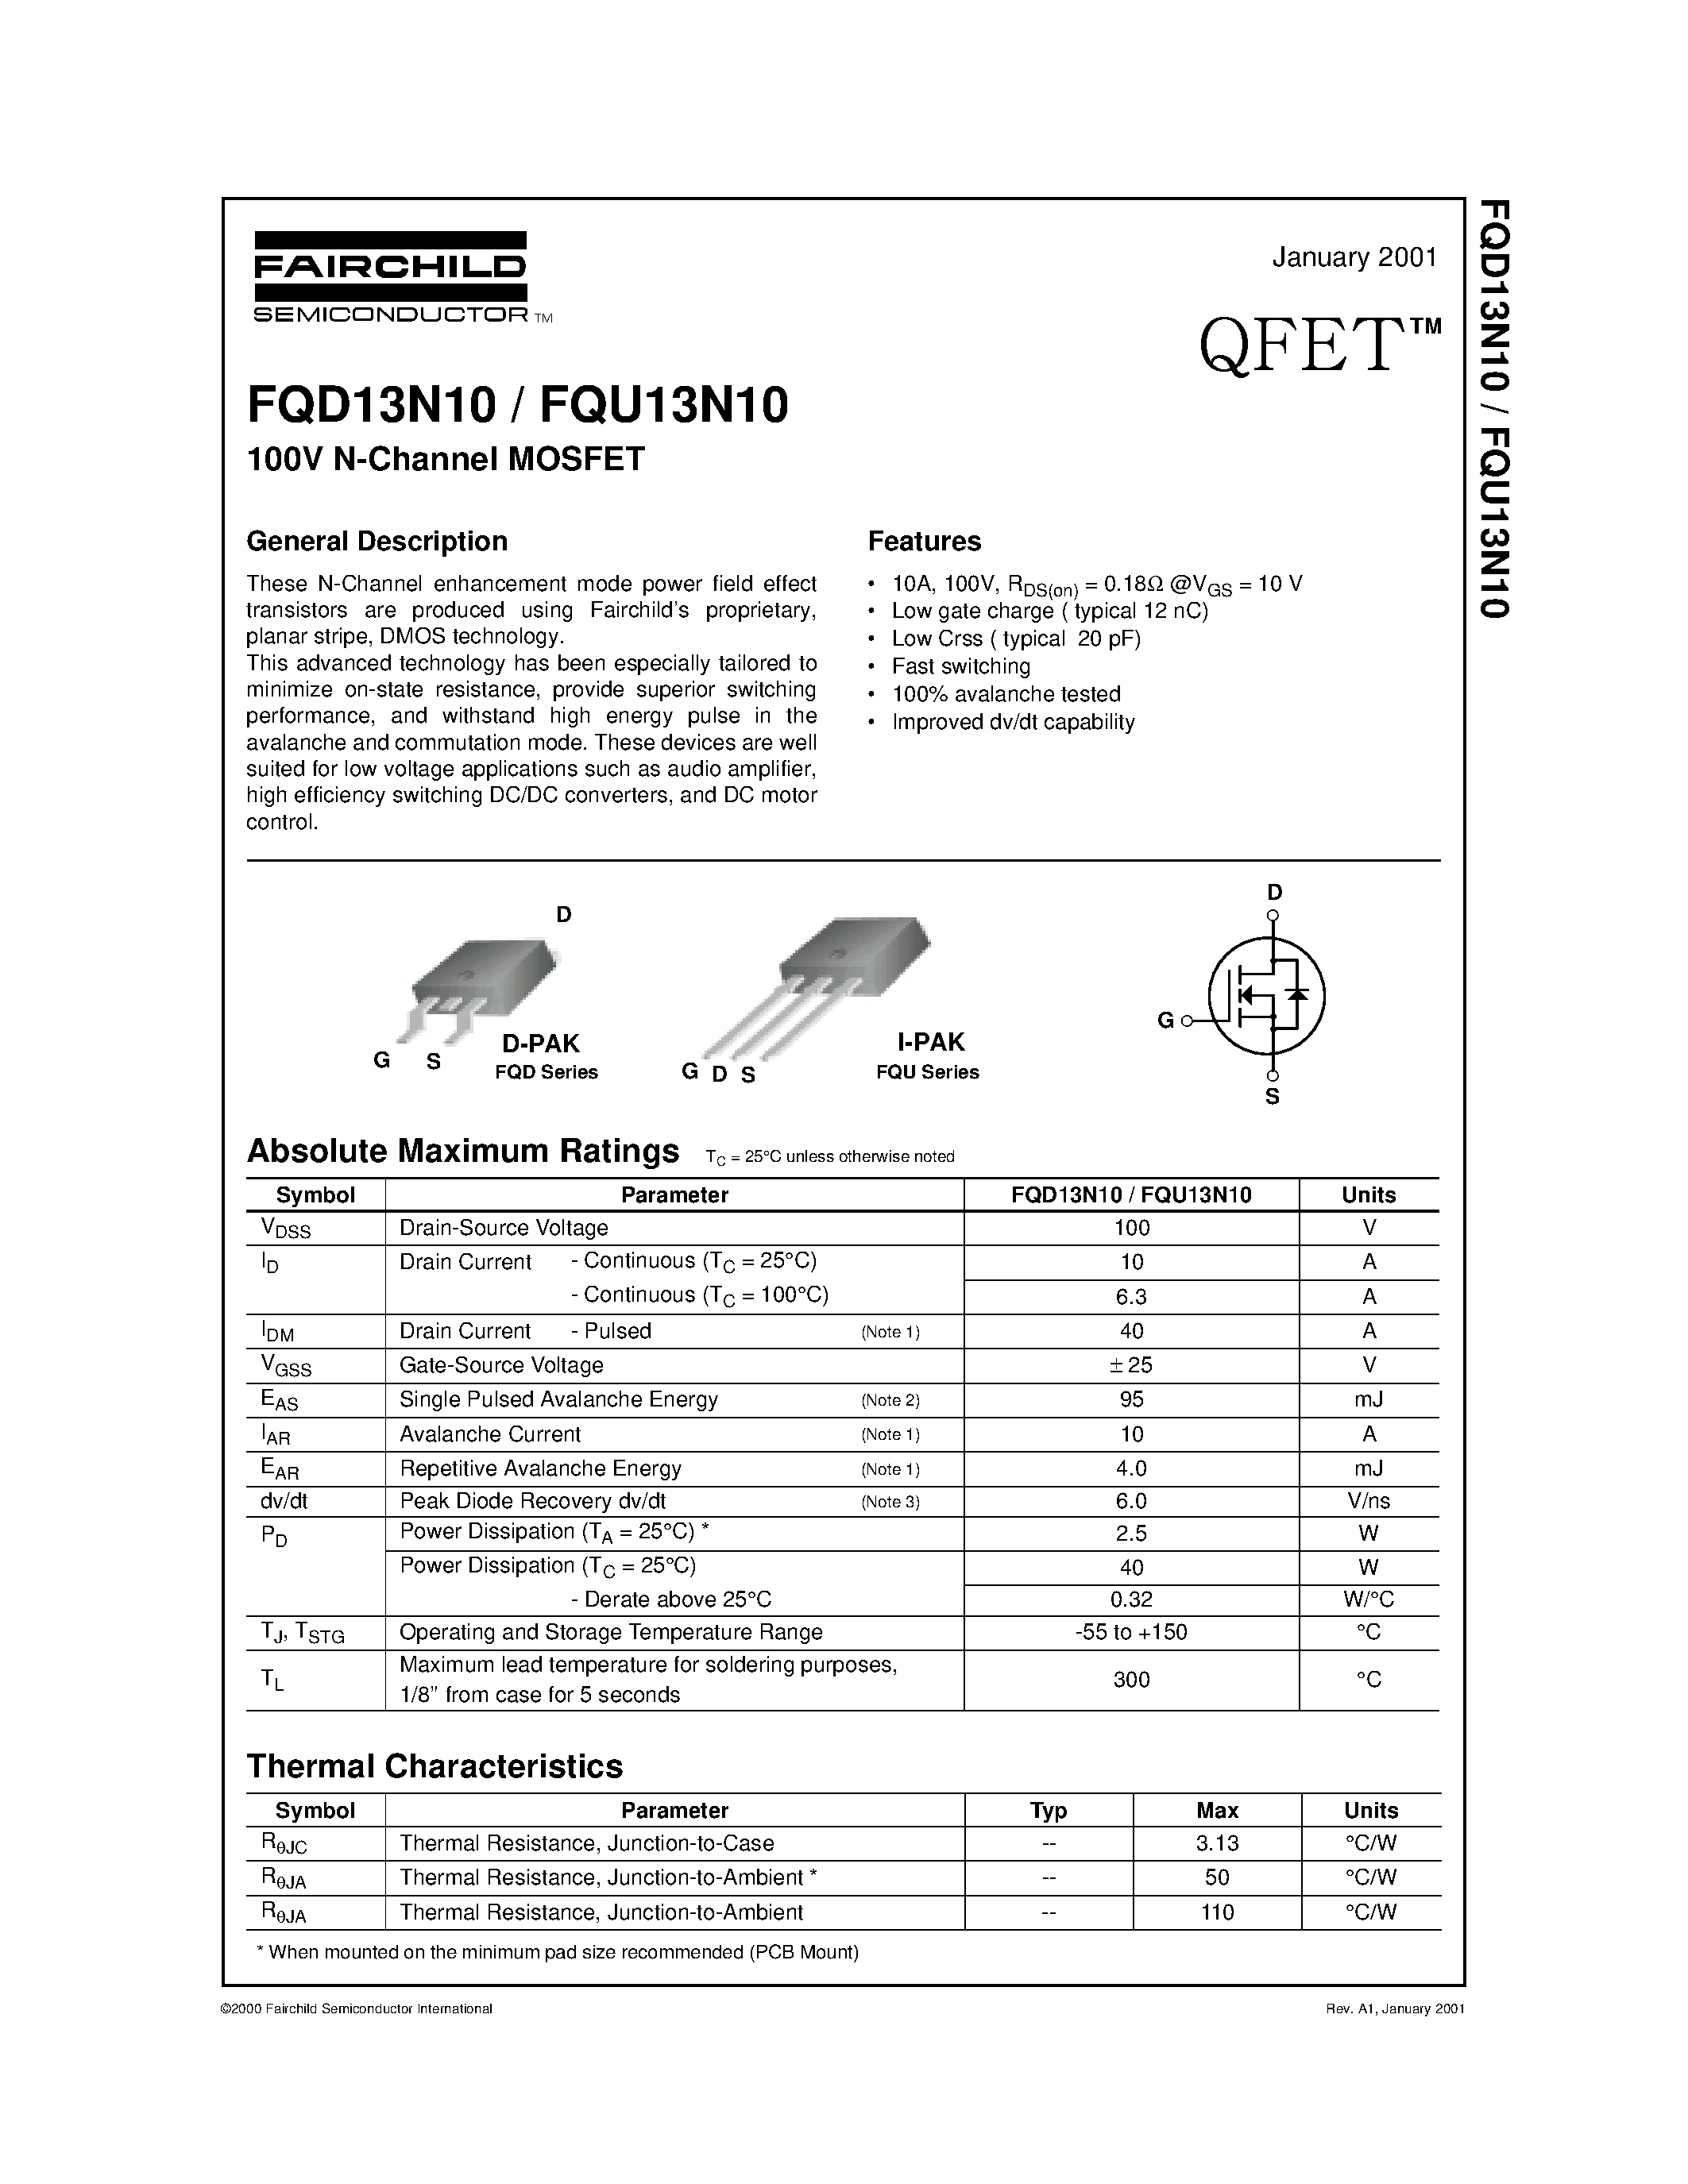 Datasheet FQD13N10 - 100V N-Channel MOSFET page 1